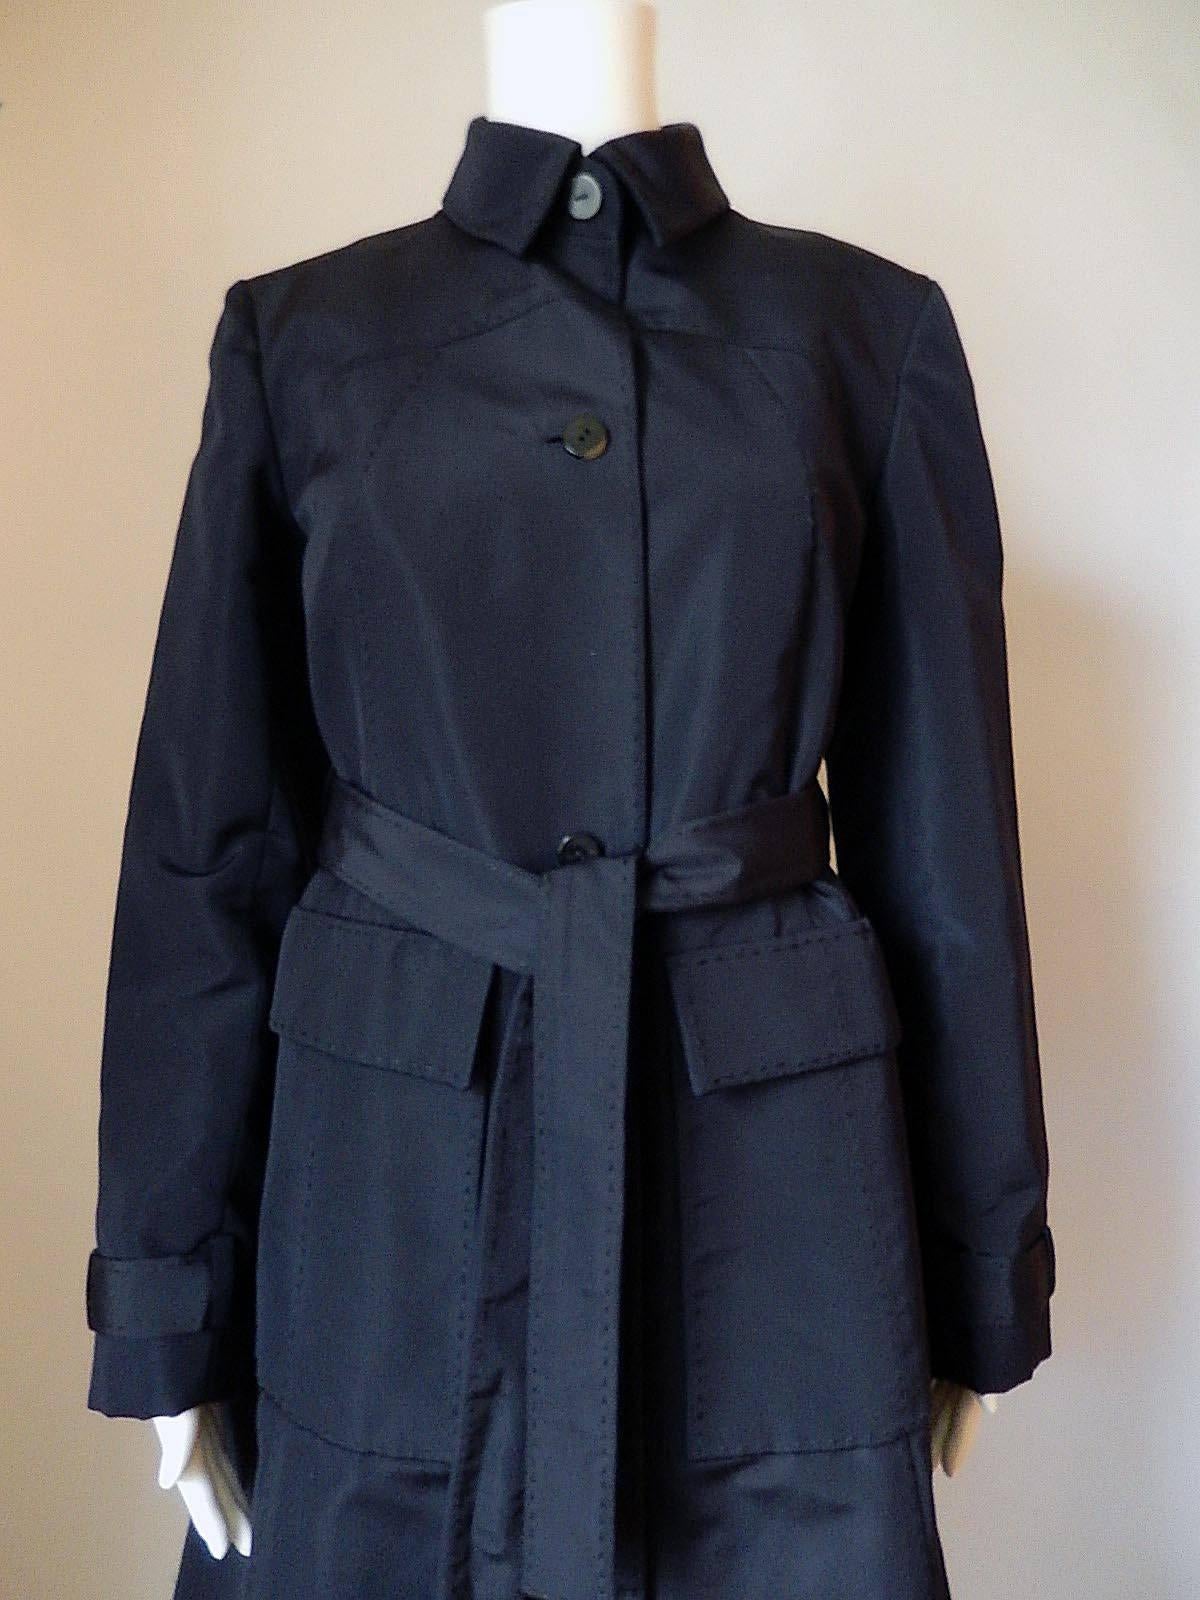 This is a Chado Ralph Rucci Navy 100% silk coat that is fully lined.
Hand stitching details throughout and too numerous to list!
Perfect condition.  Looks unworn
This will fit a larger size, so please have a look at the measurements.
Bust: 